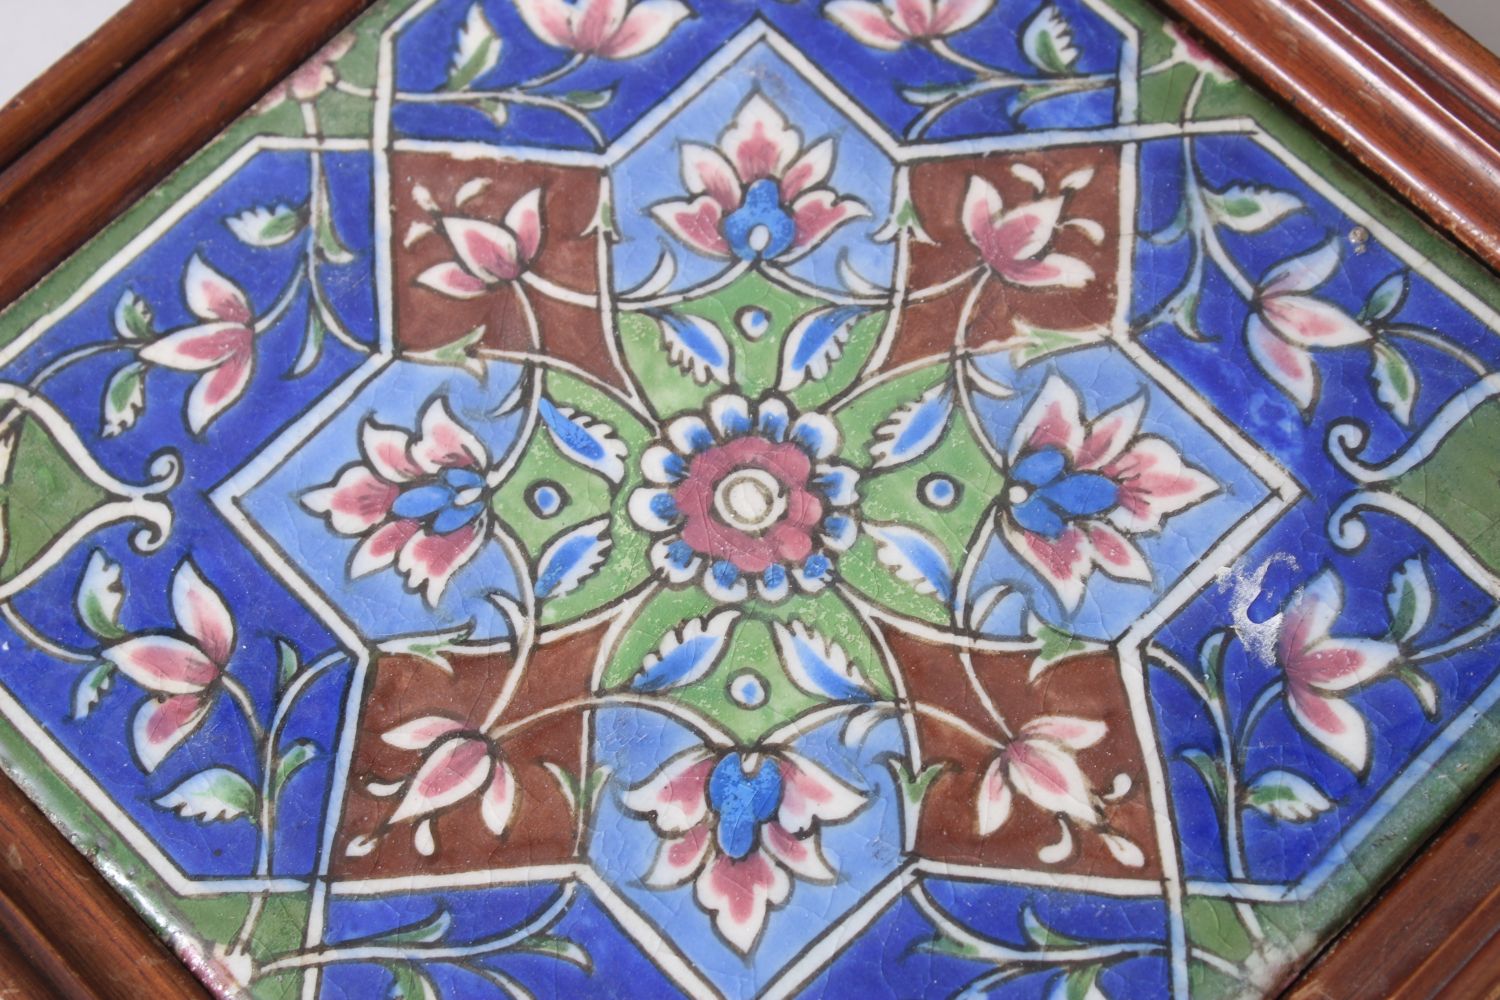 TWO PERSIAN QAJAR FRAMED POTTERY TILES. - Image 2 of 4